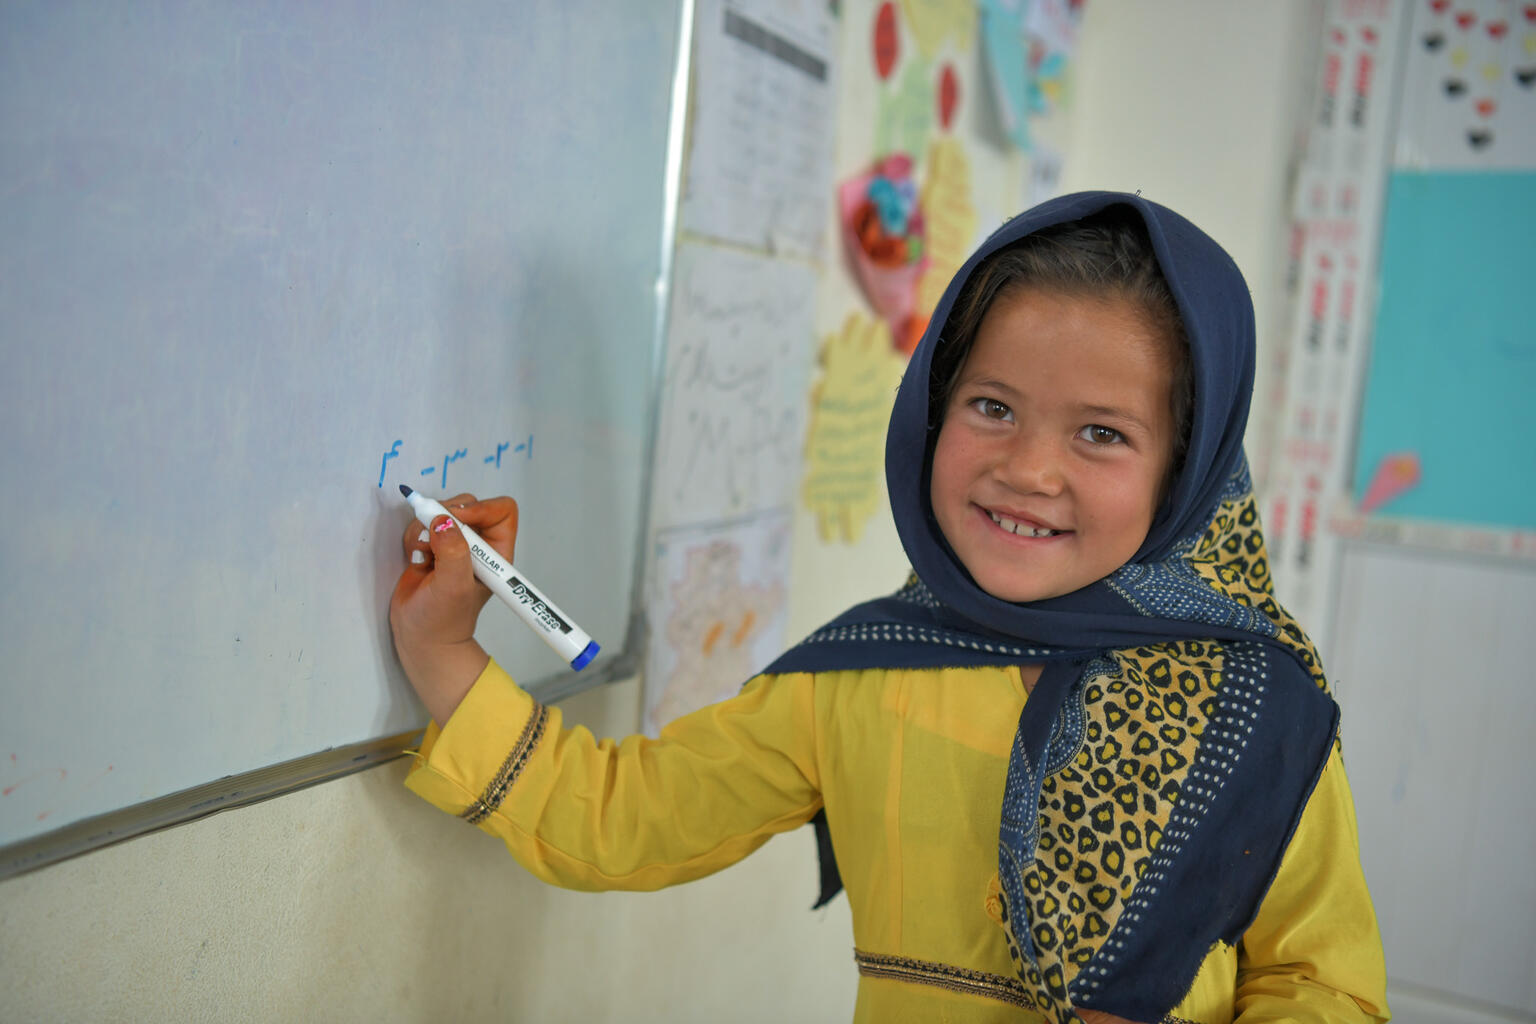 6-year-old Najma practices writing math problems on a whiteboard in Afghanistan